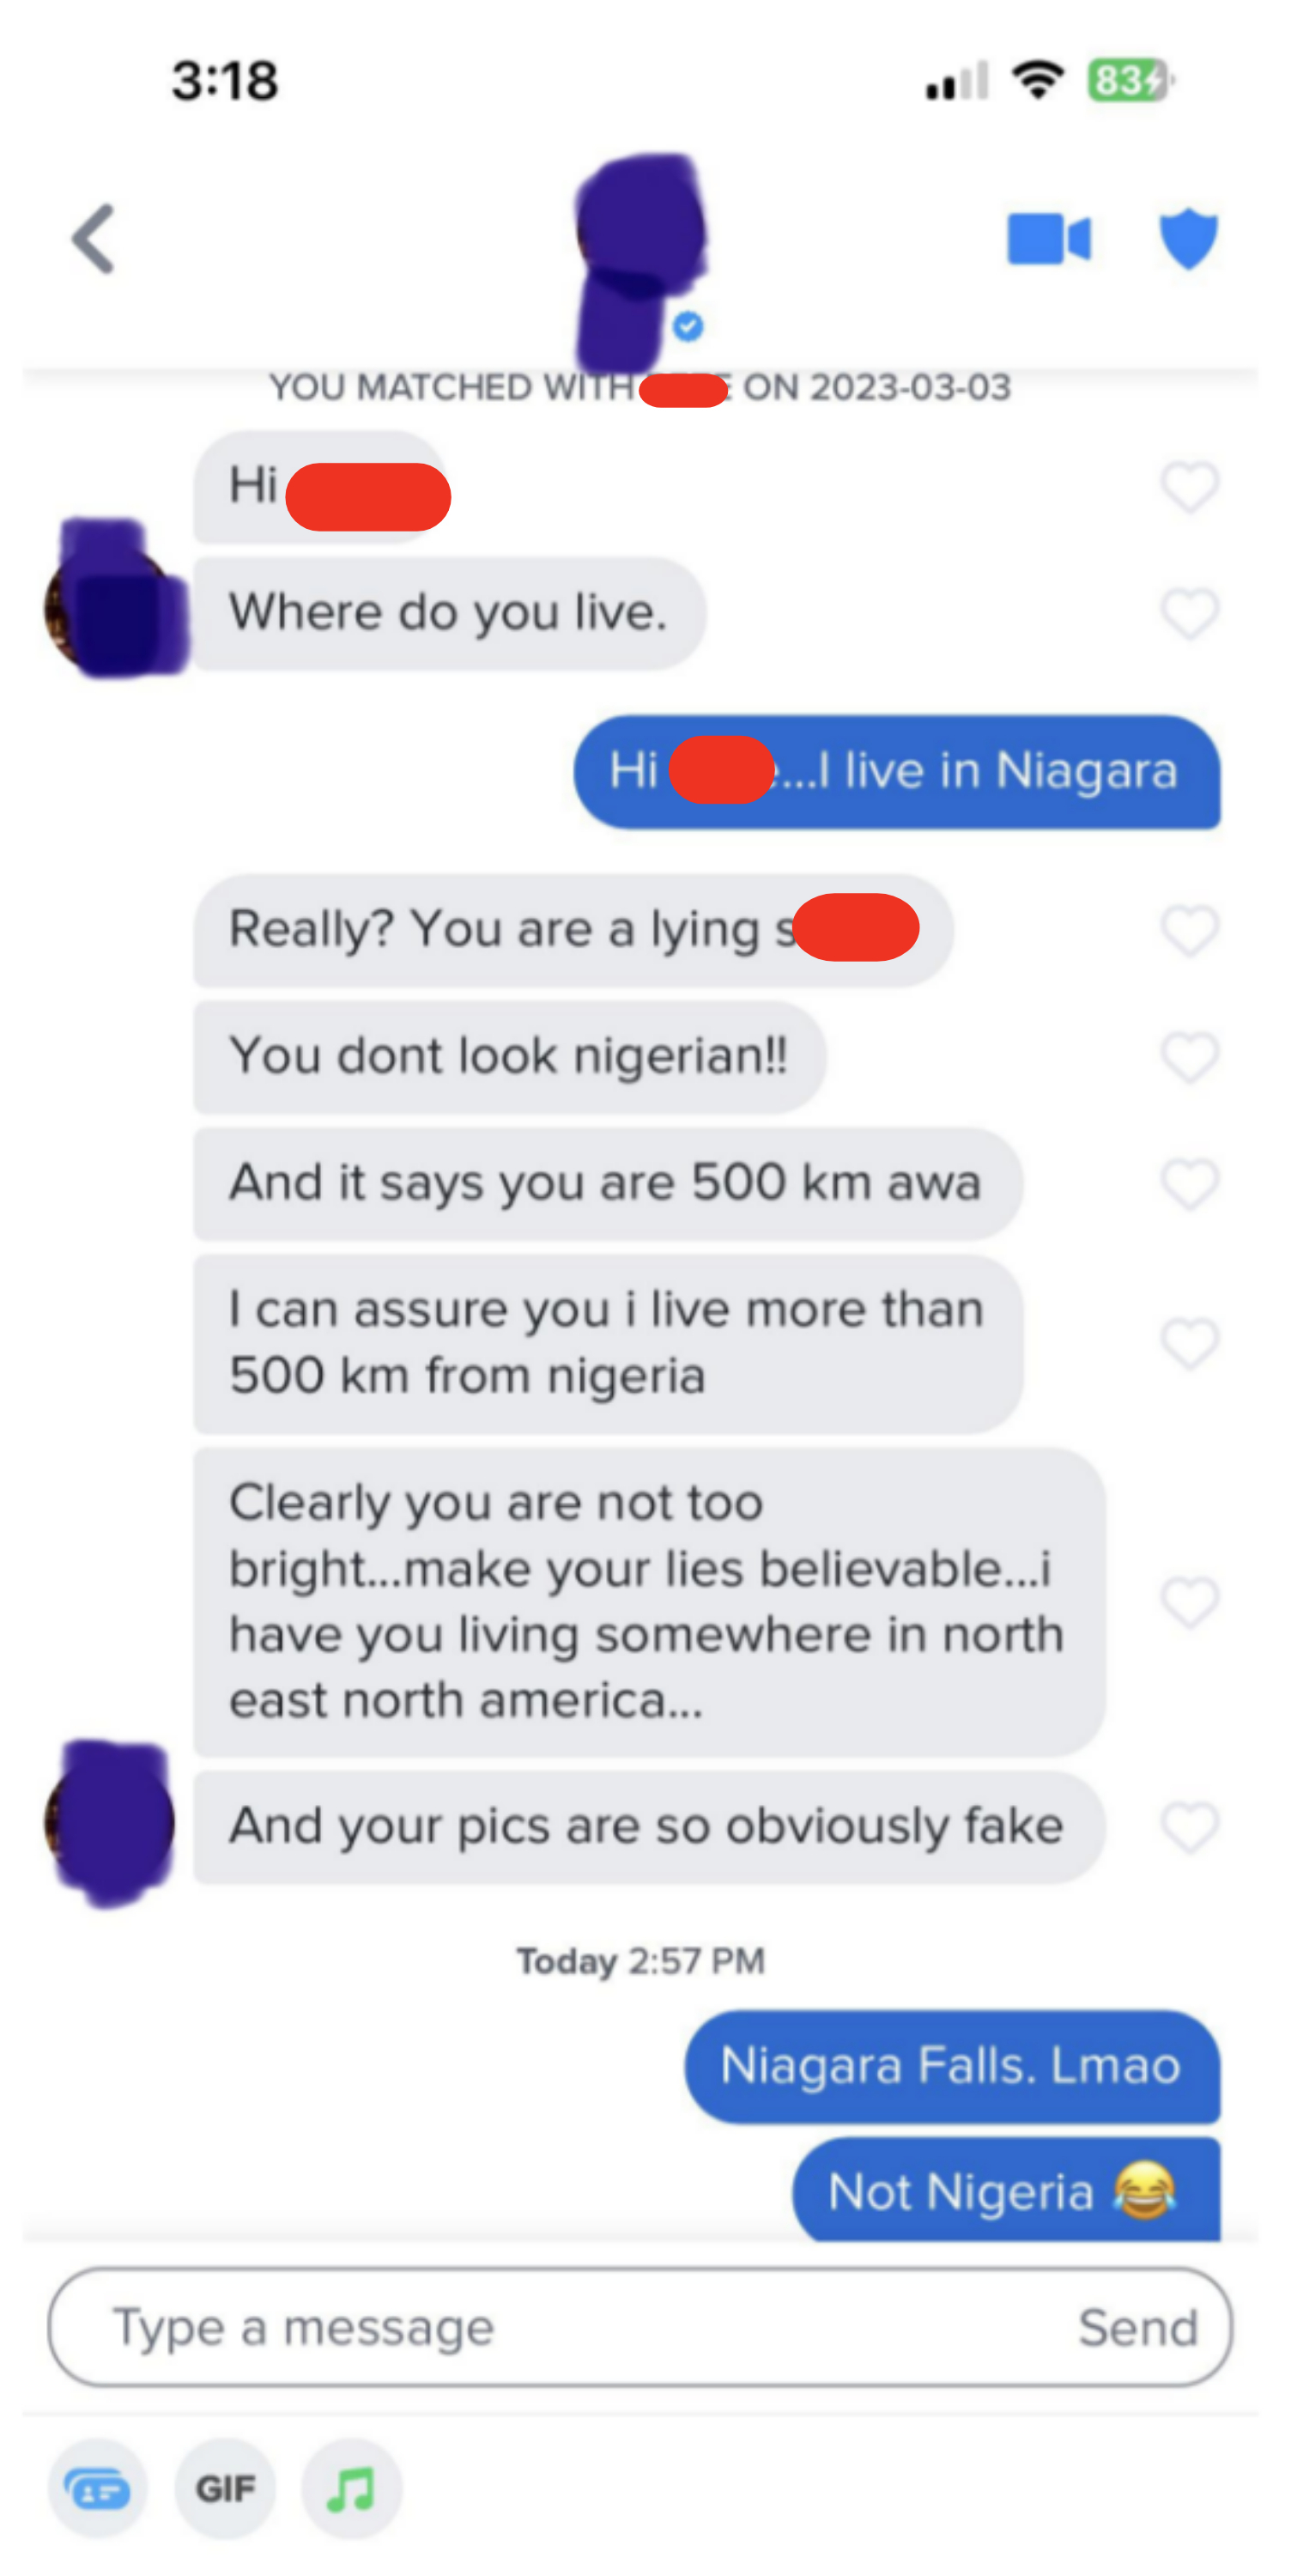 Someone asks where their match is from, they respond Niagara, the first person misreads it as Nigeria and goes on a rant about how they don&#x27;t look Nigerian and shouldn&#x27;t lie